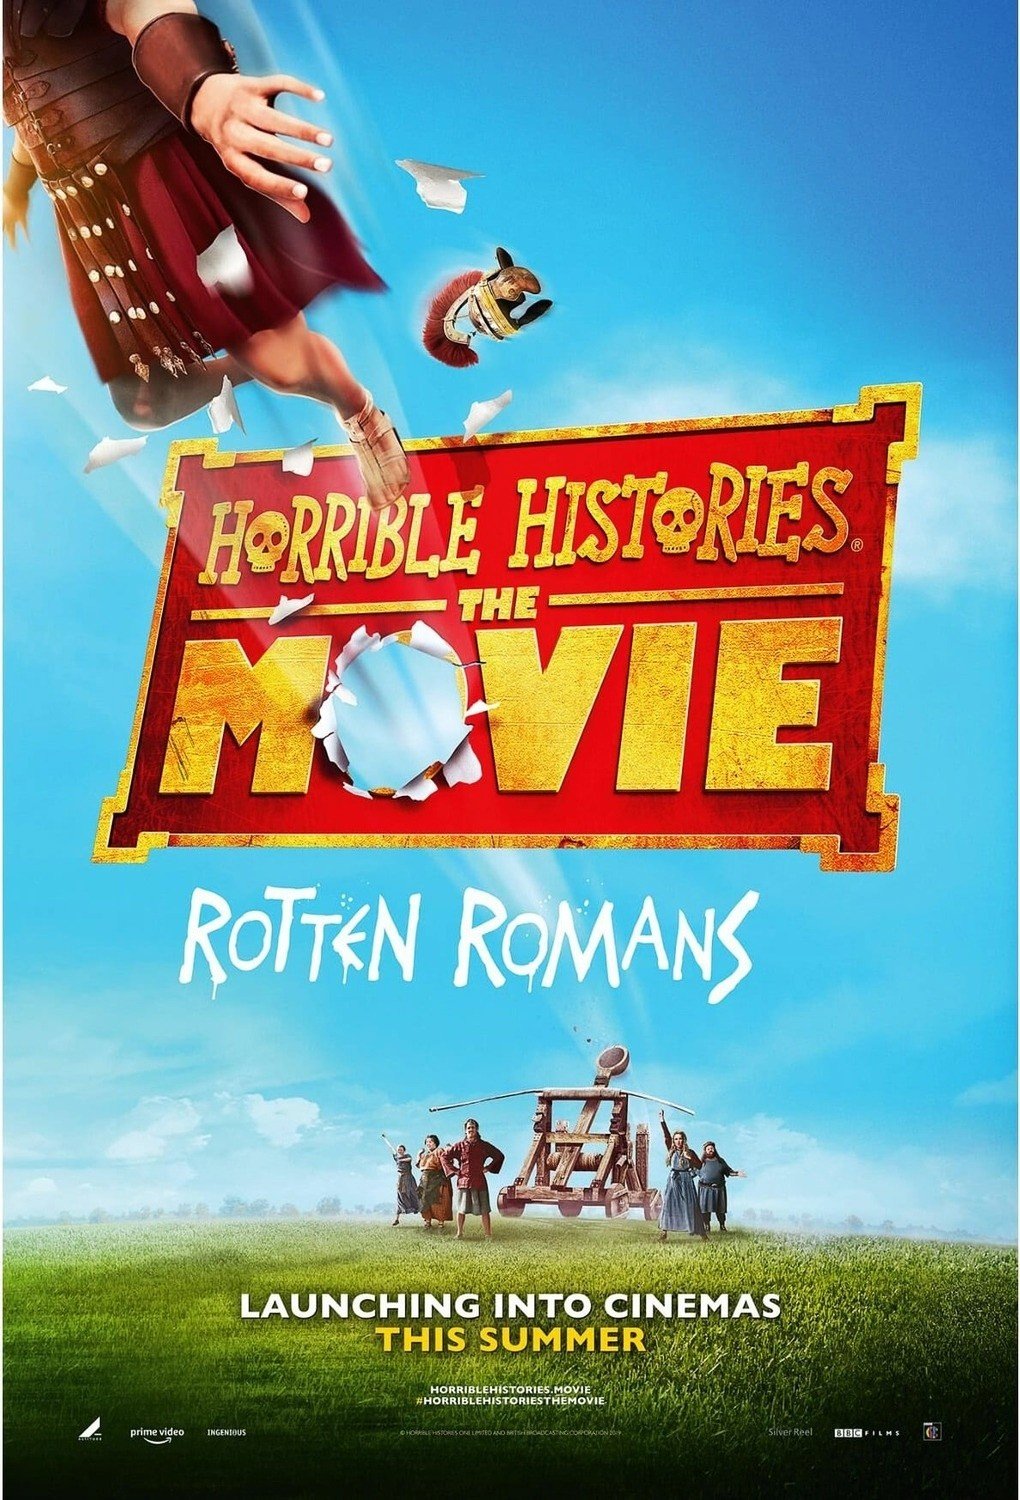 Poster of Altitude Films' Horrible Histories: The Movie - Rotten Romans (2019)